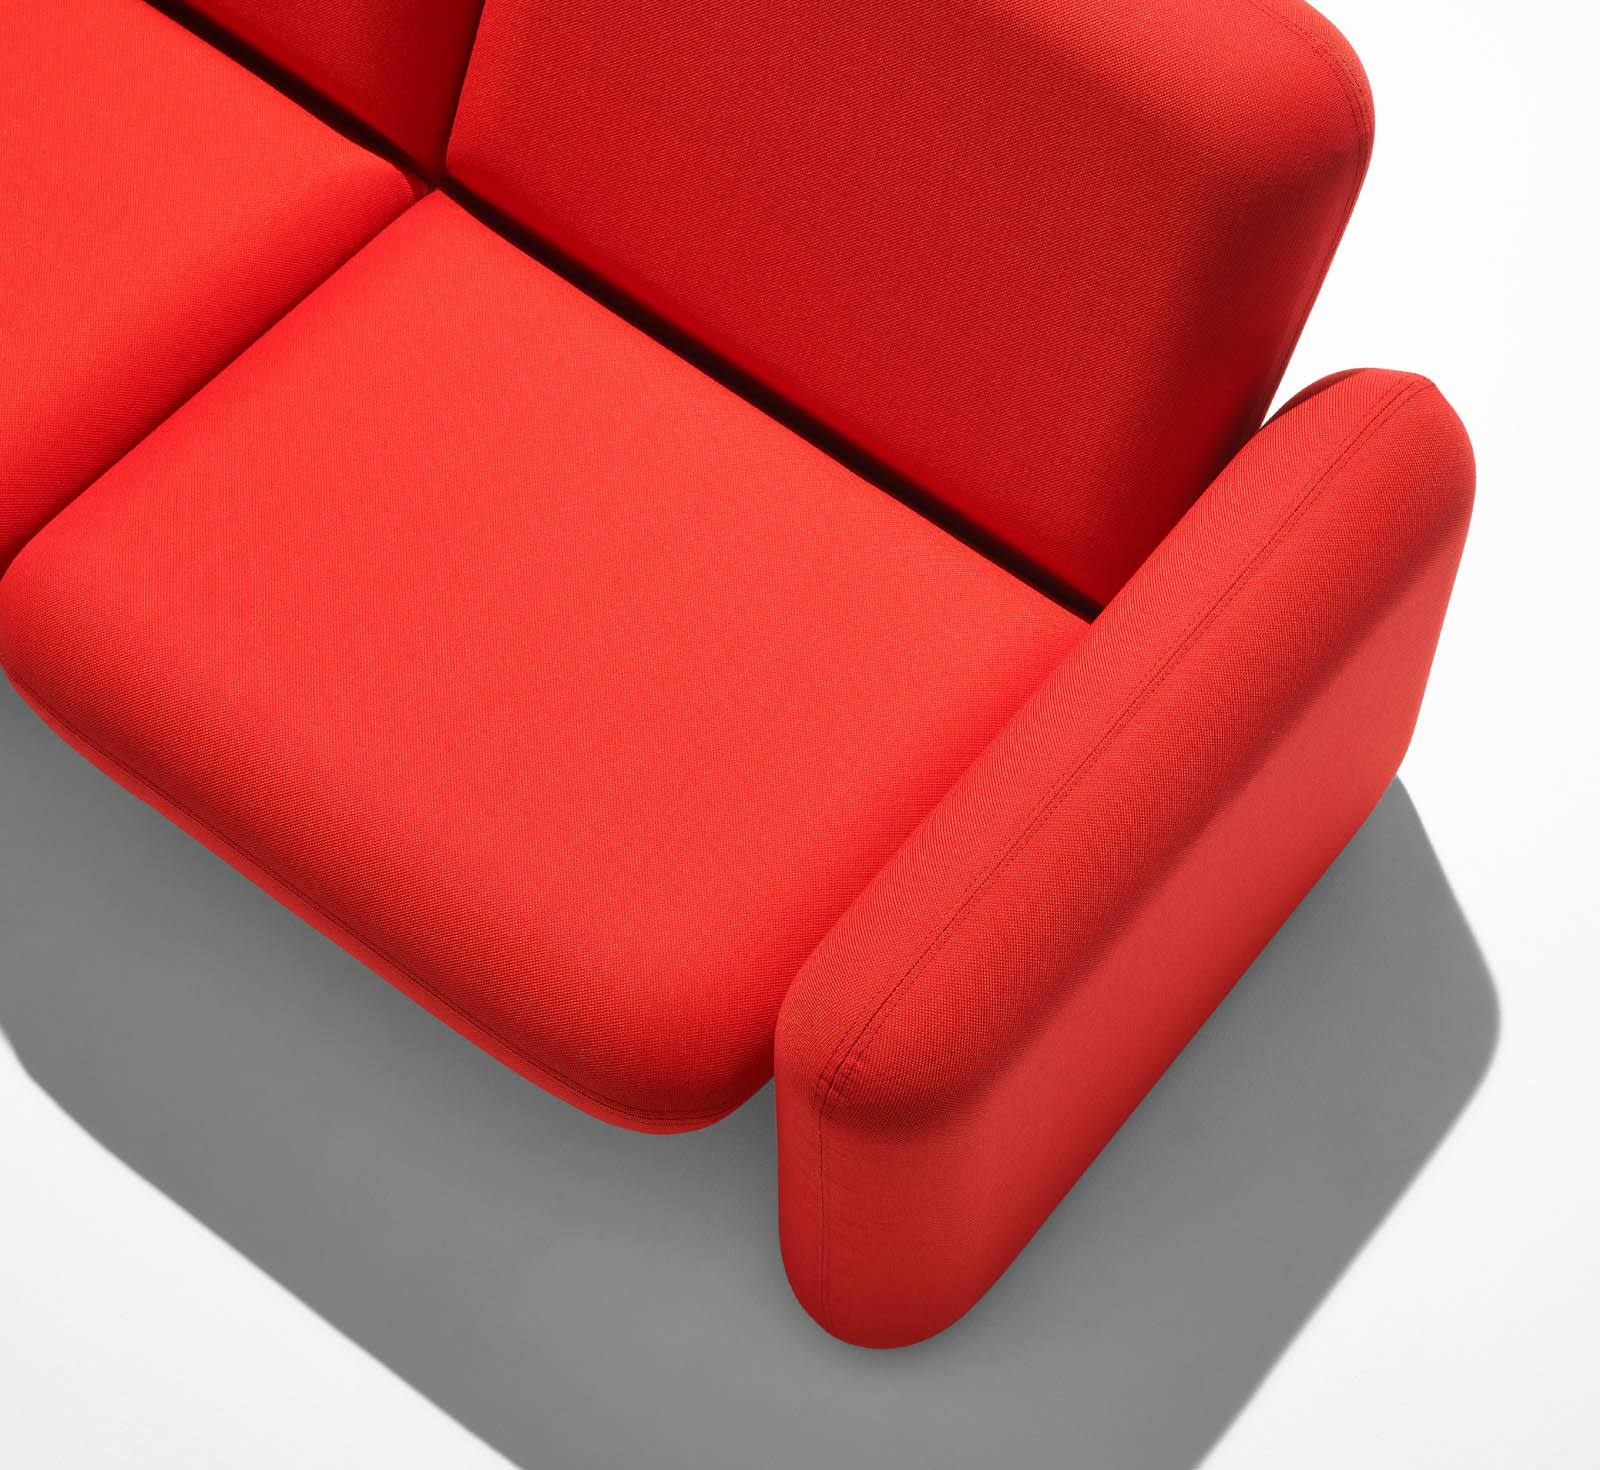 Overhead close-up view of a Wilkes Modular Sofa Group Sofa in red.